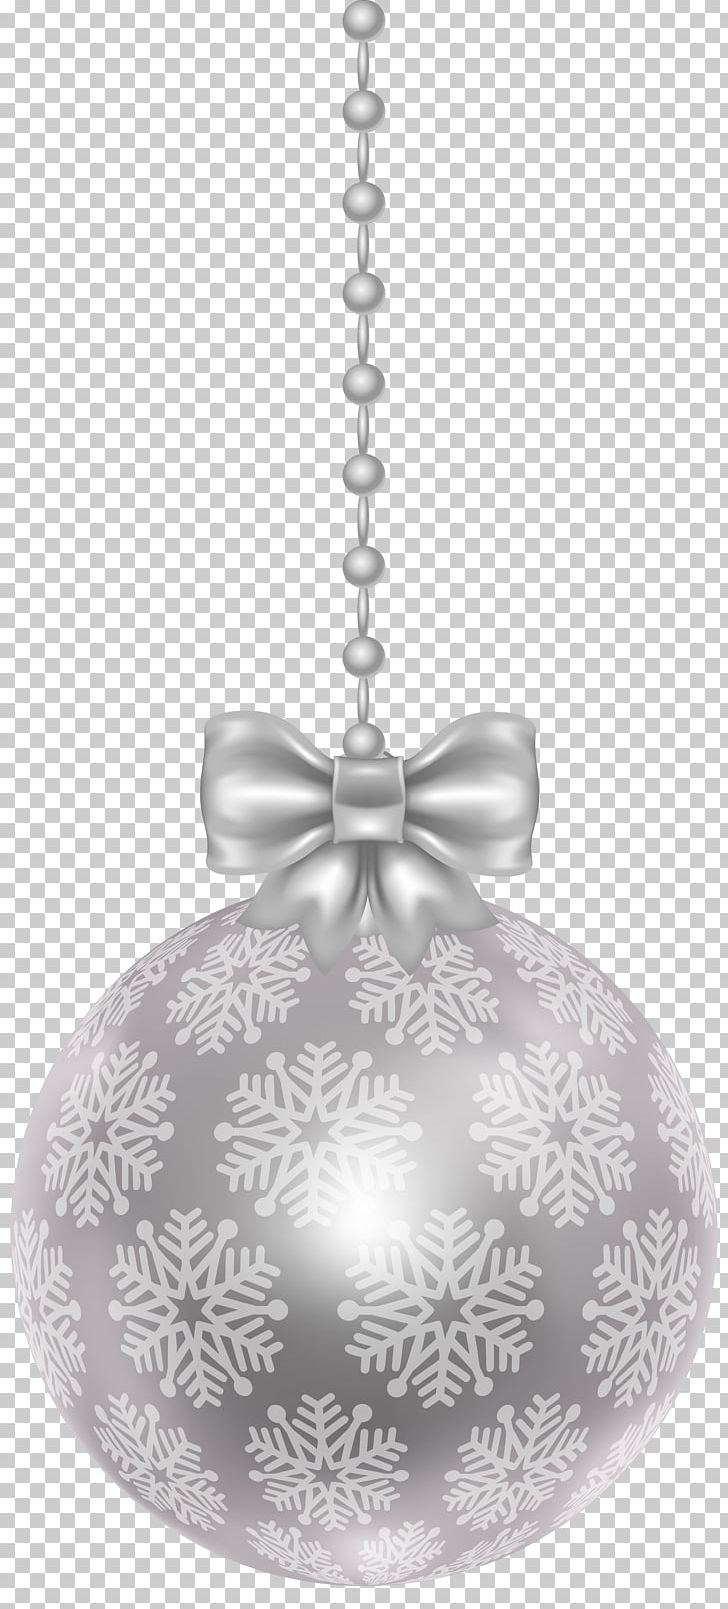 Christmas Ornament Christmas Decoration White Christmas PNG, Clipart, Ball, Christmas, Christmas Decoration, Christmas Lights, Christmas Ornament Free PNG Download